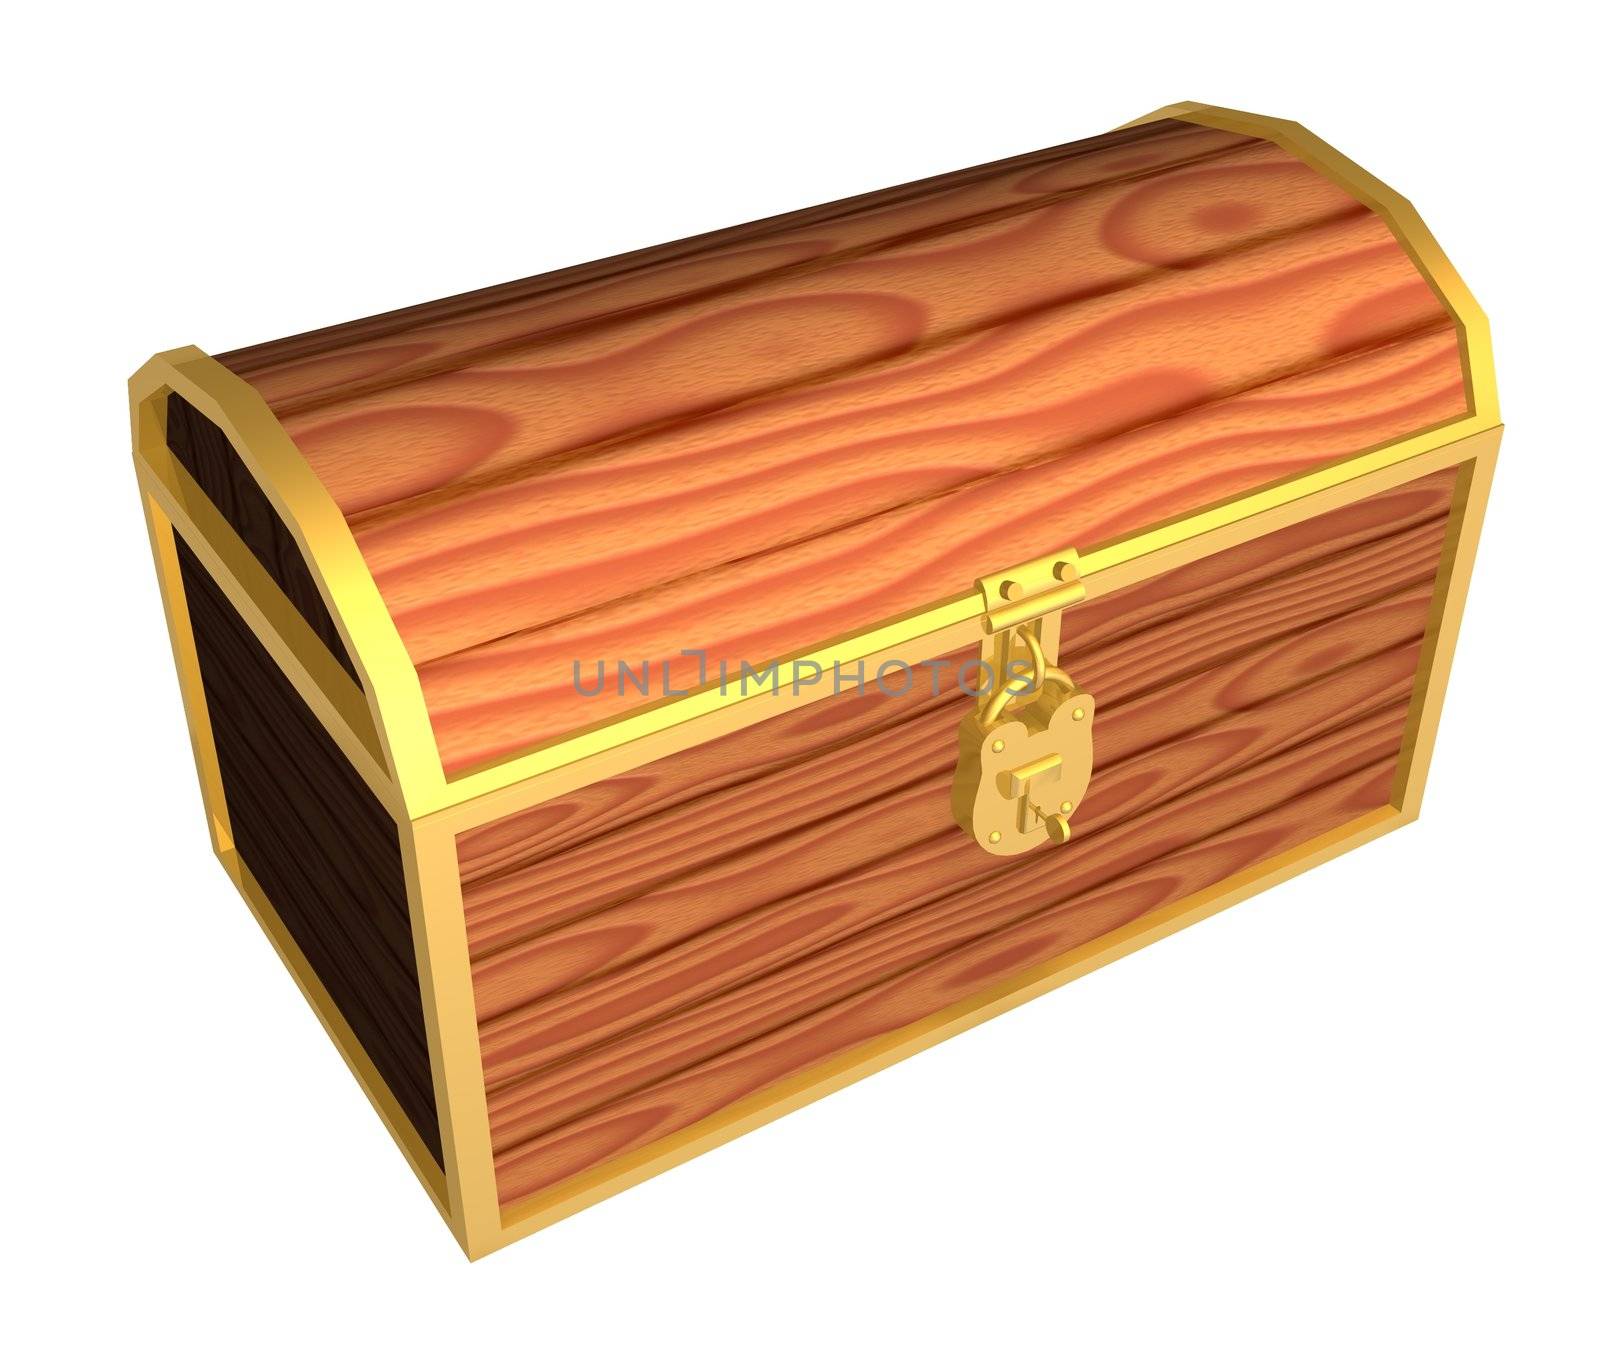 Illustration of a wooden treasure chest with lock and key